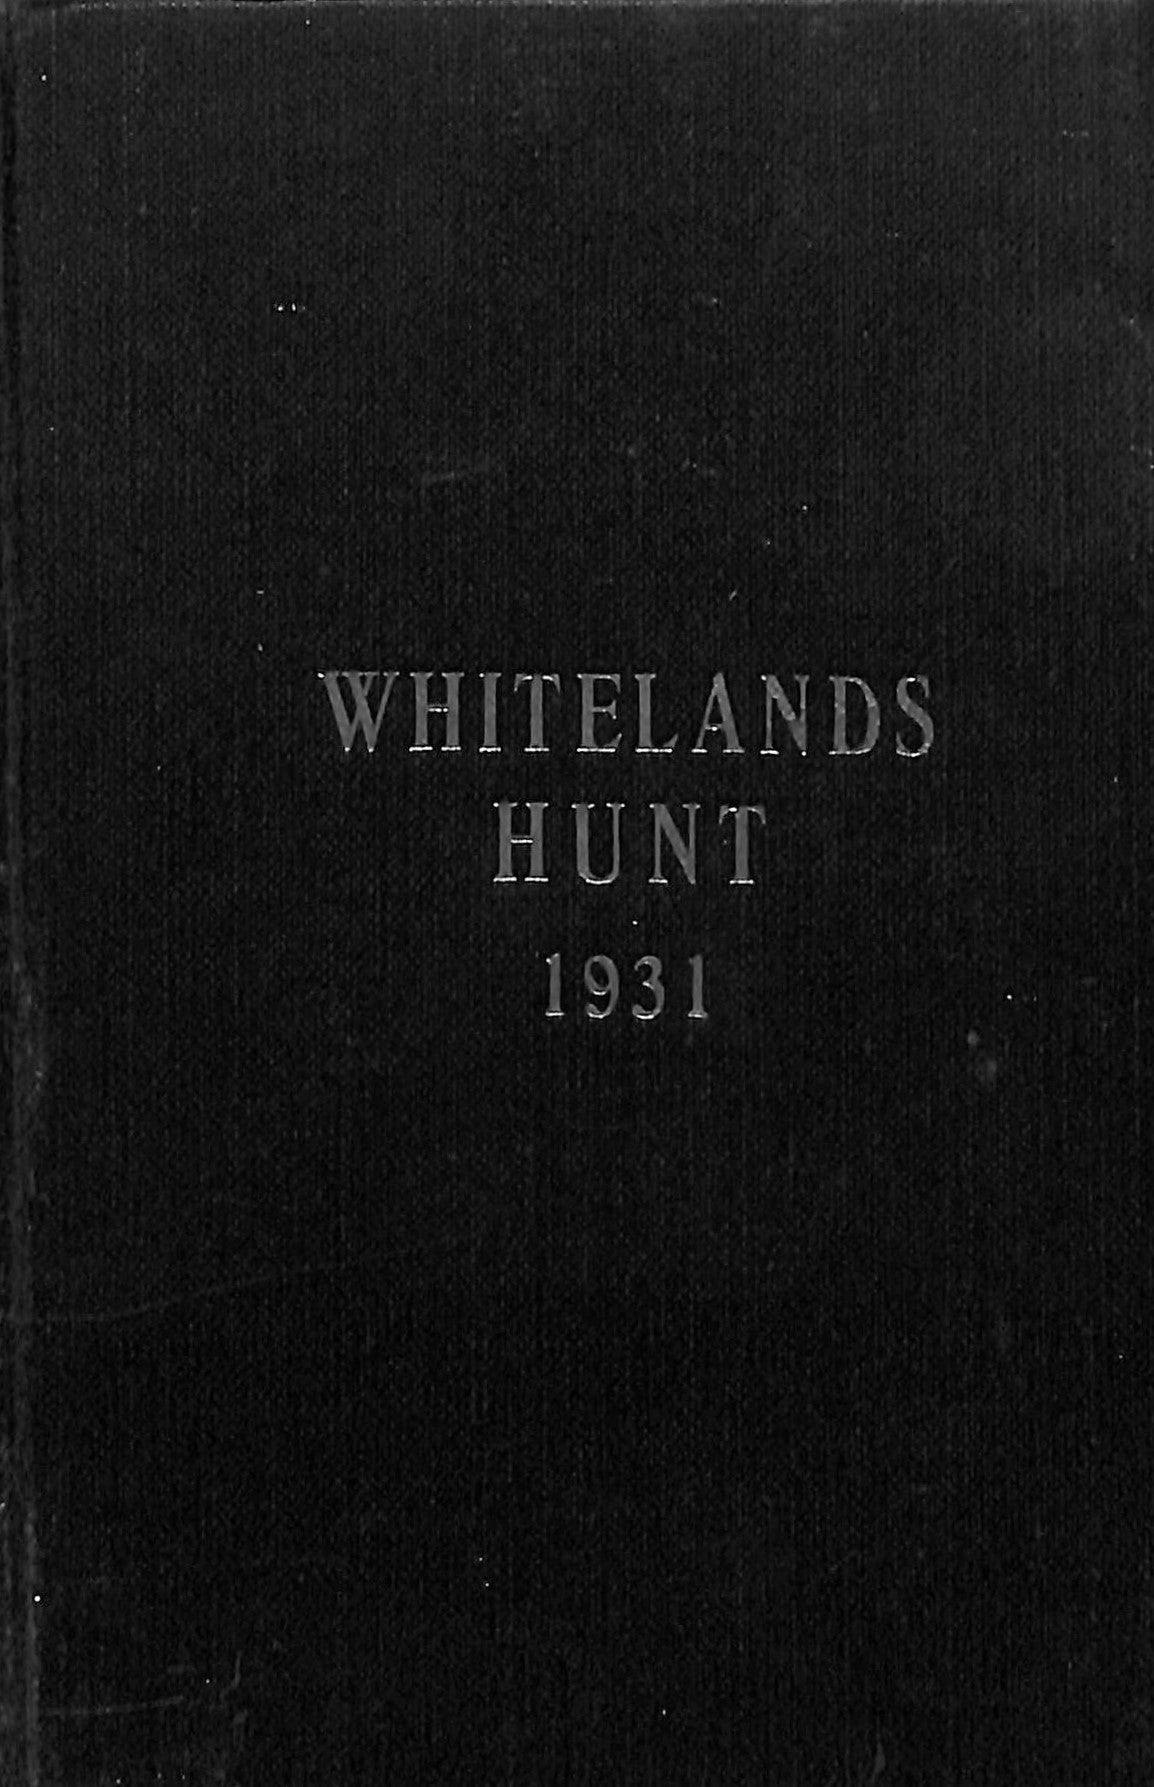 "Whitelands Hunt: By-Laws House Rules"